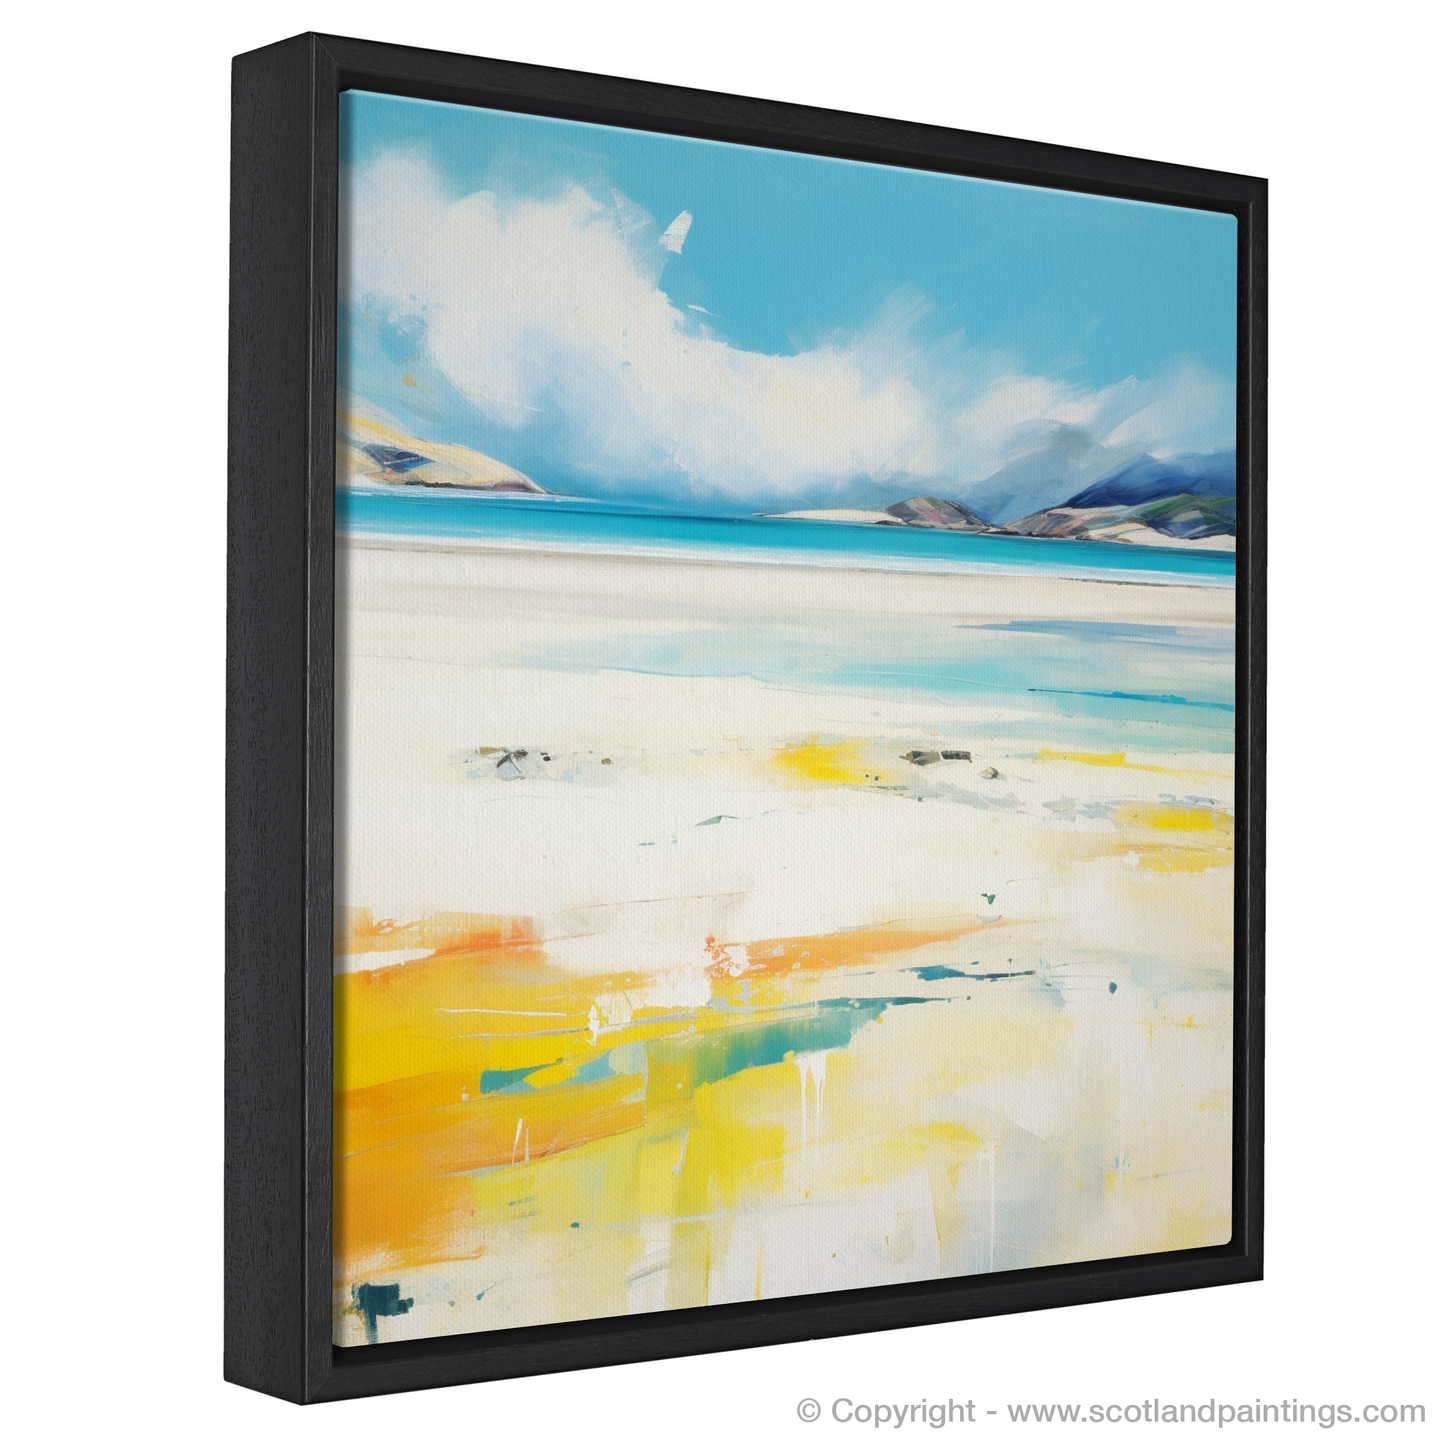 Painting and Art Print of Luskentyre Beach, Isle of Harris in summer entitled "Luskentyre Beach Bliss: An Abstract Ode to Summer".